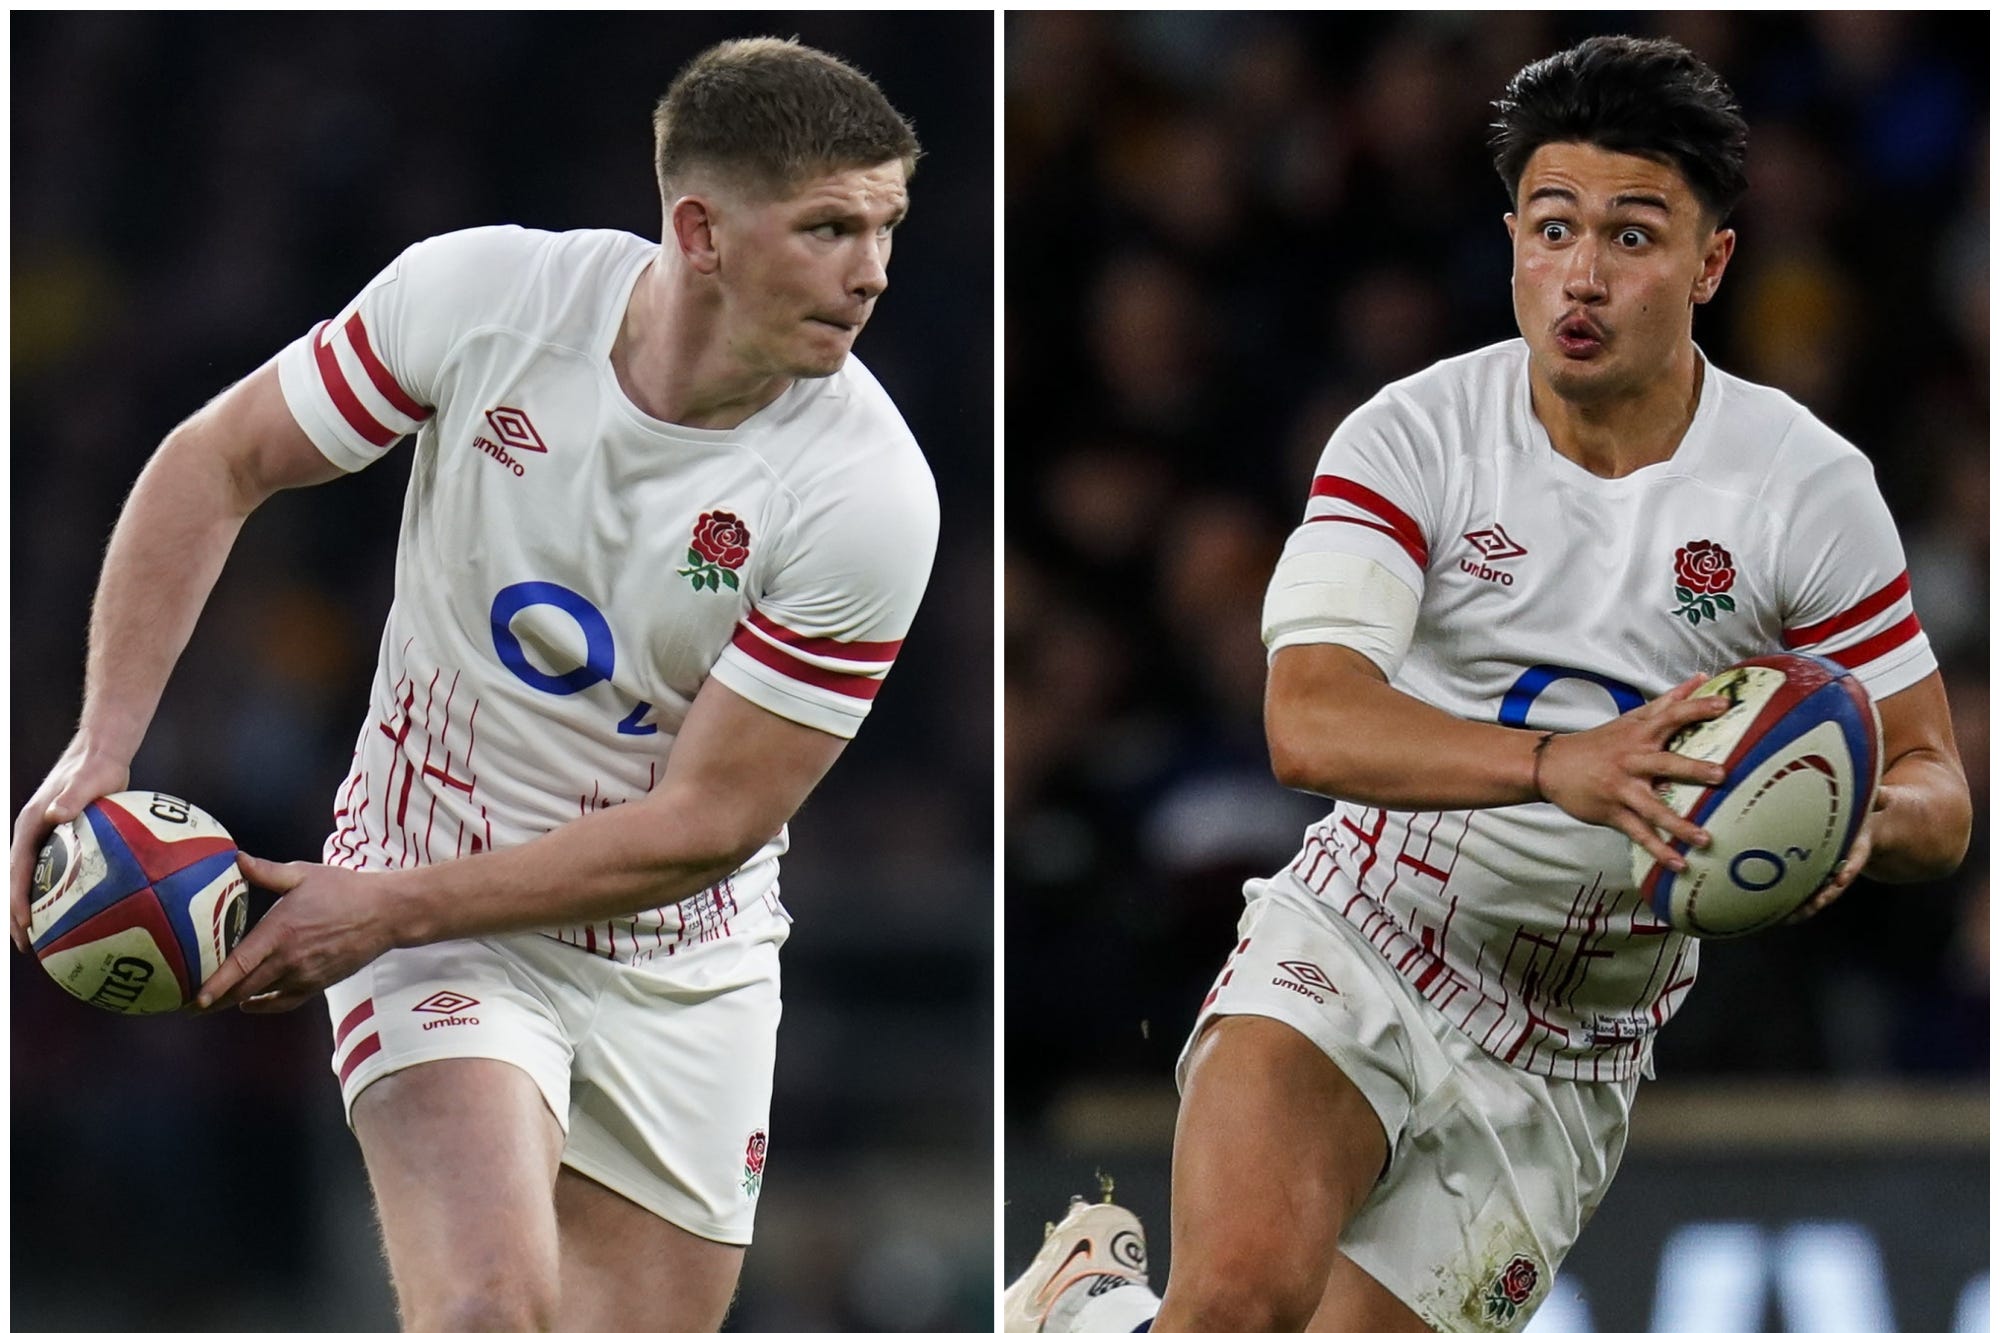 Owen Farrell and Marcus Smith are rivals for the England No 10 jersey